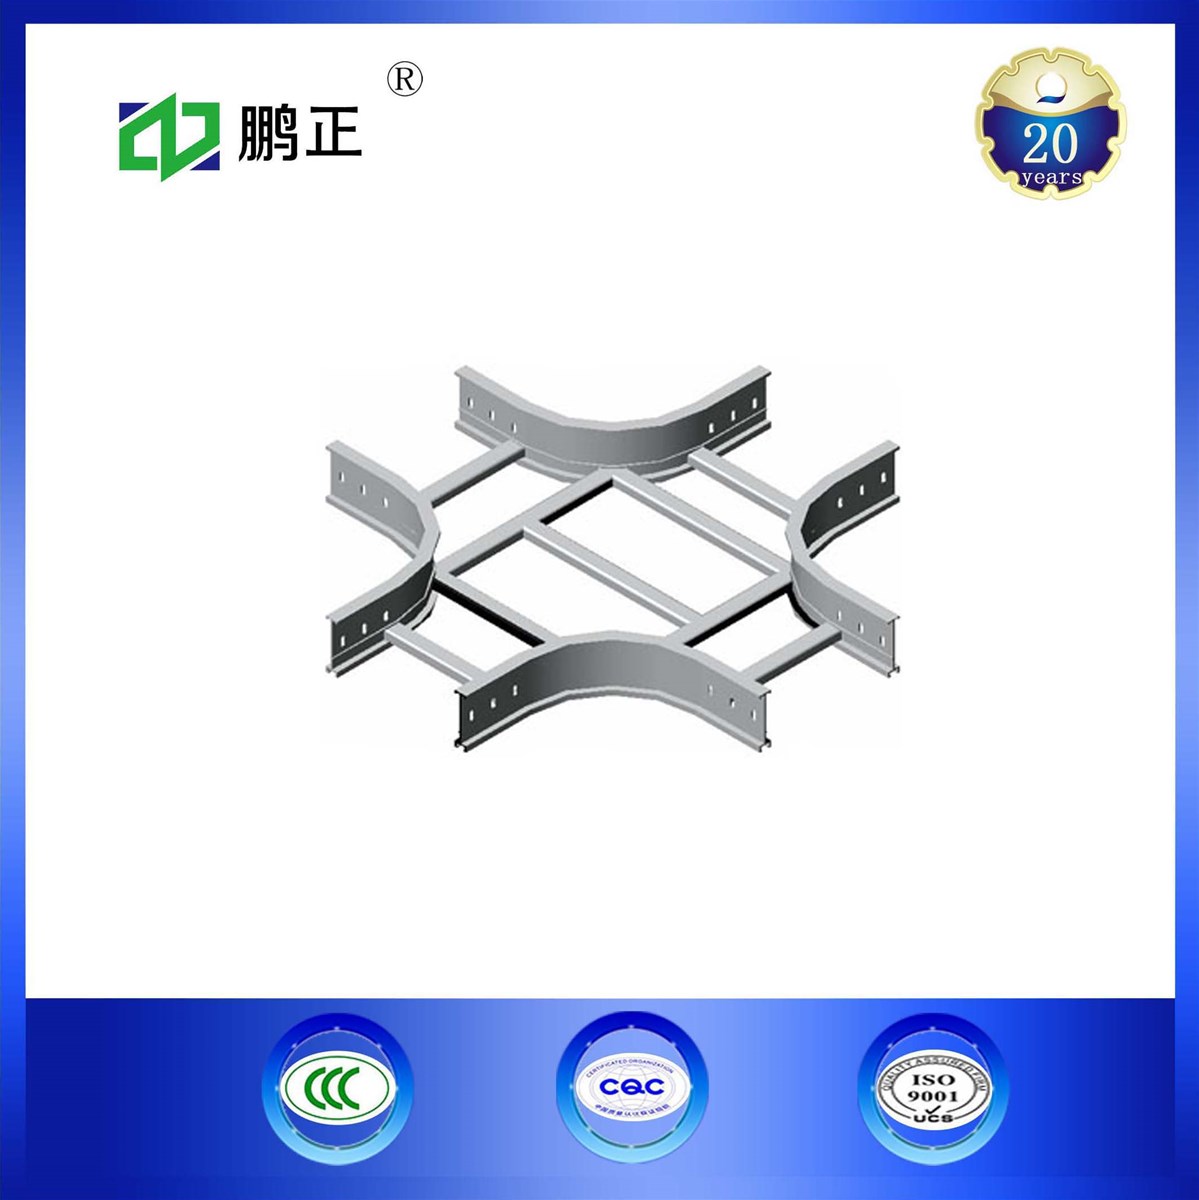 Galvanized steel ladder channel perforated cable tray trunk manufacturer